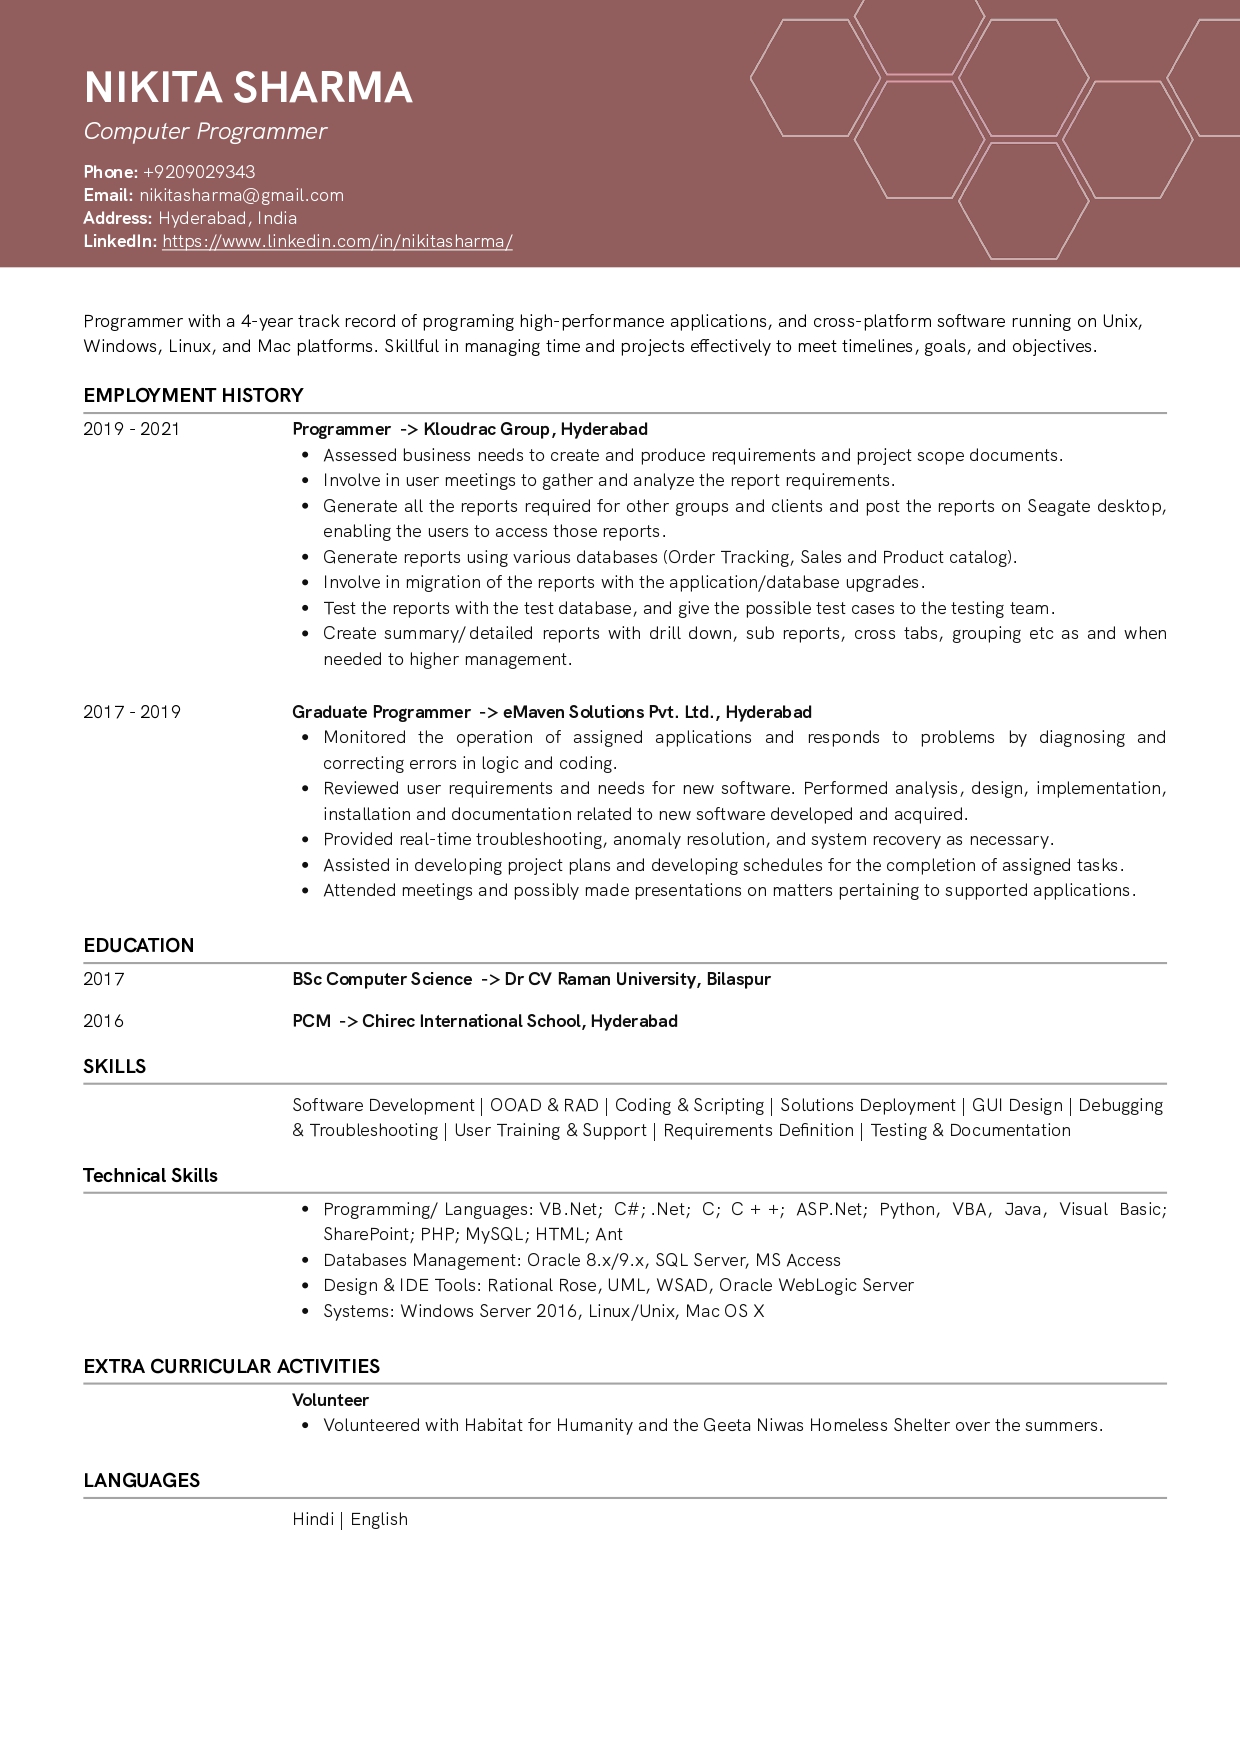 Sample Resume of Computer Programmer | Free Resume Templates & Samples on Resumod.co